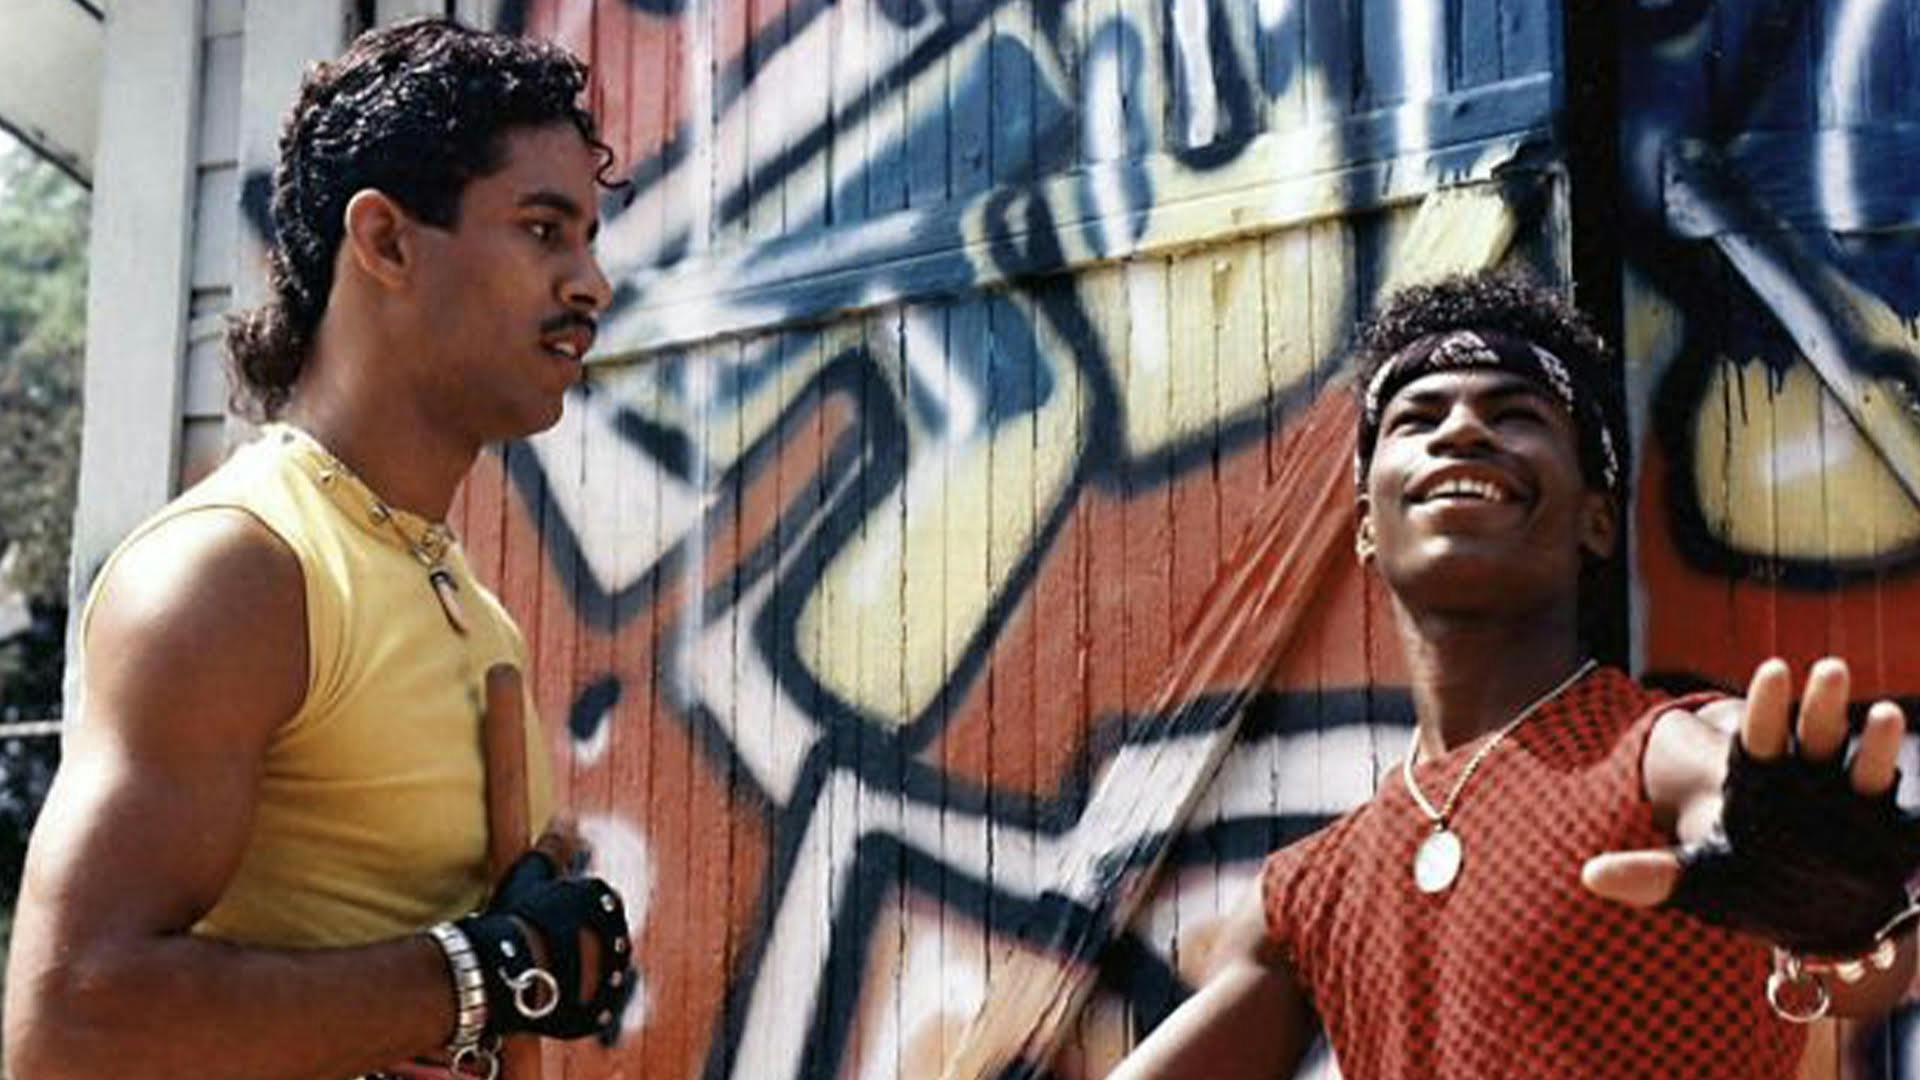 Turbo and Ozone from the movie 'Breakin'